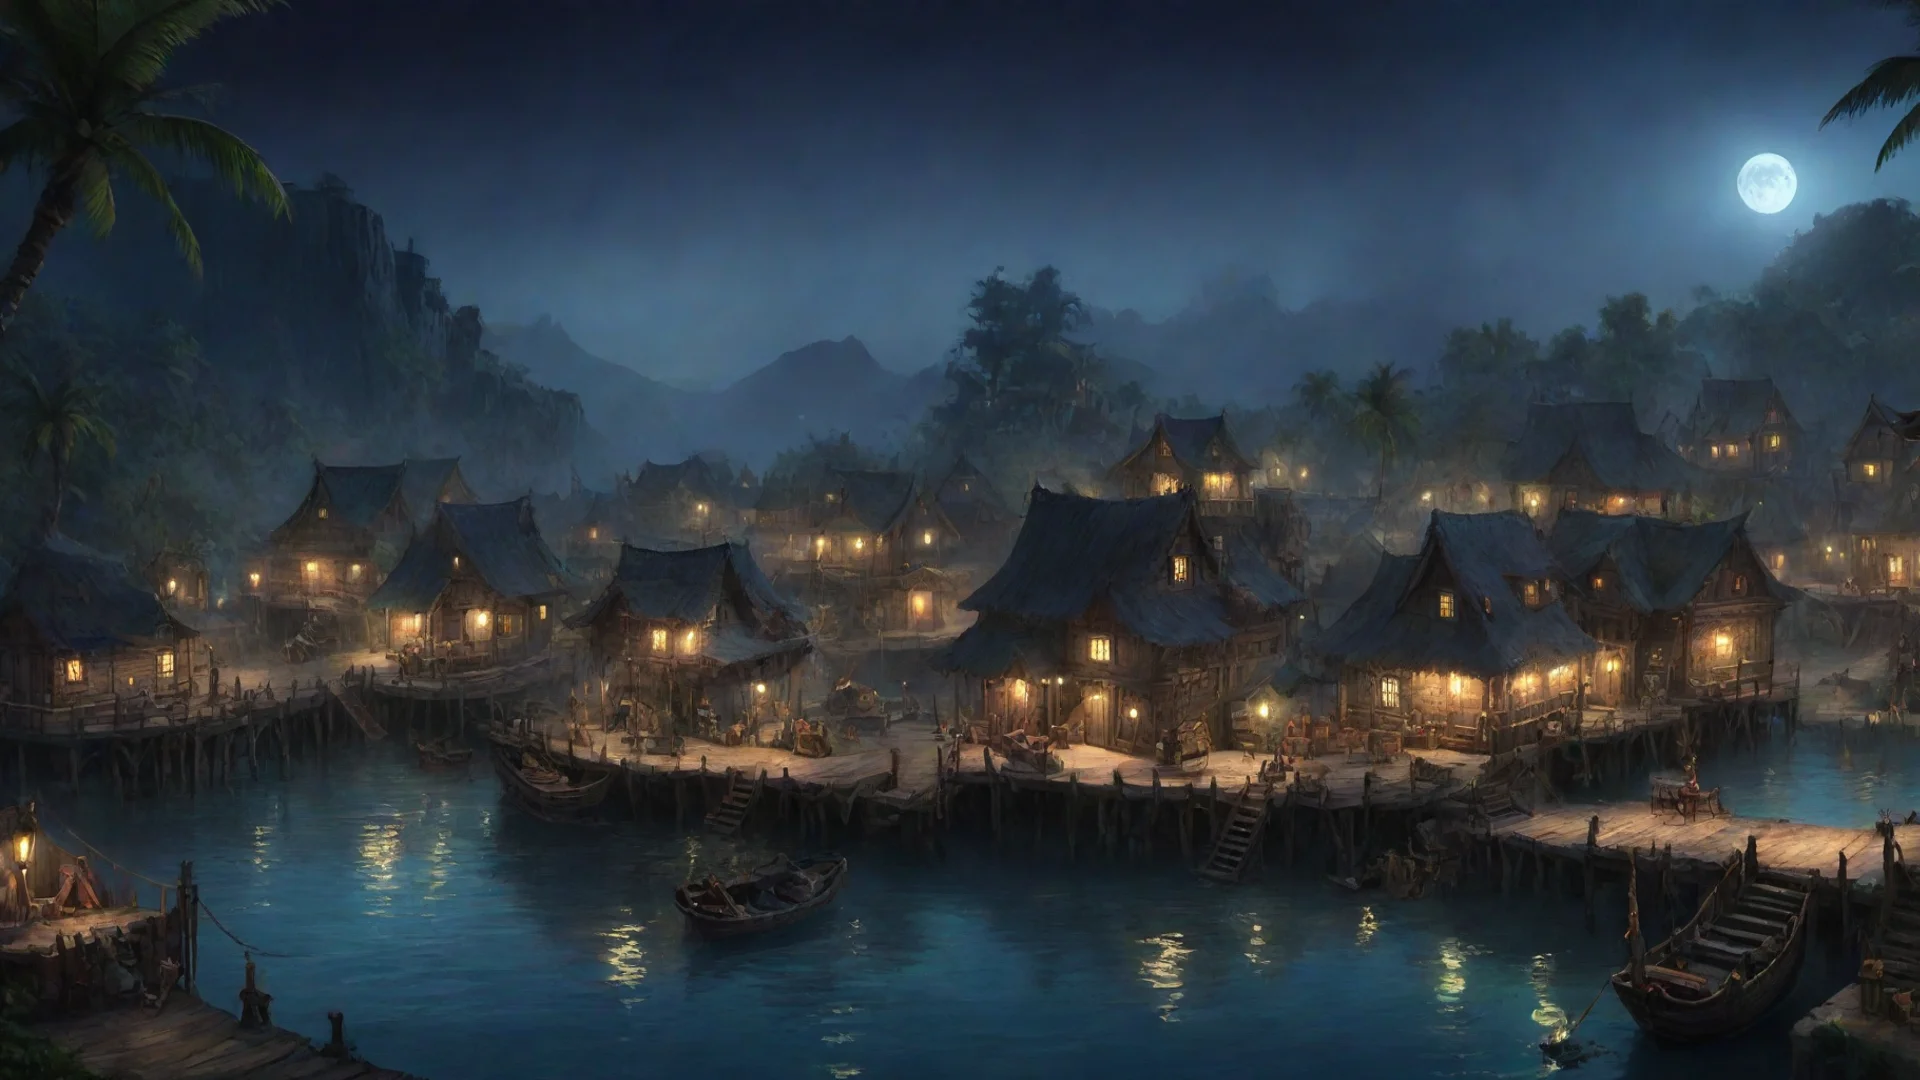 amazing pirate village by night concept art awesome portrait 2 wide